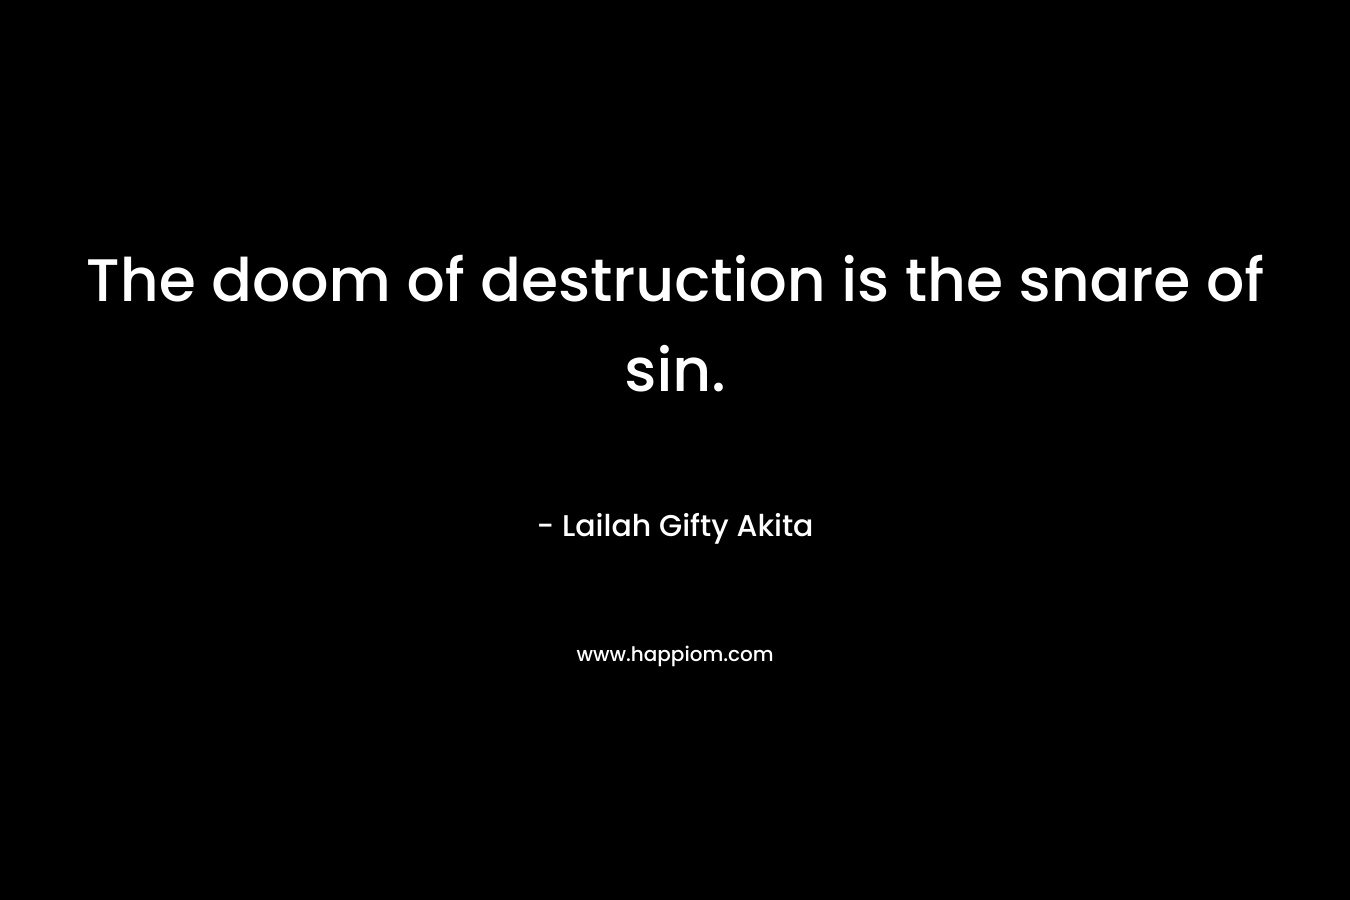 The doom of destruction is the snare of sin.